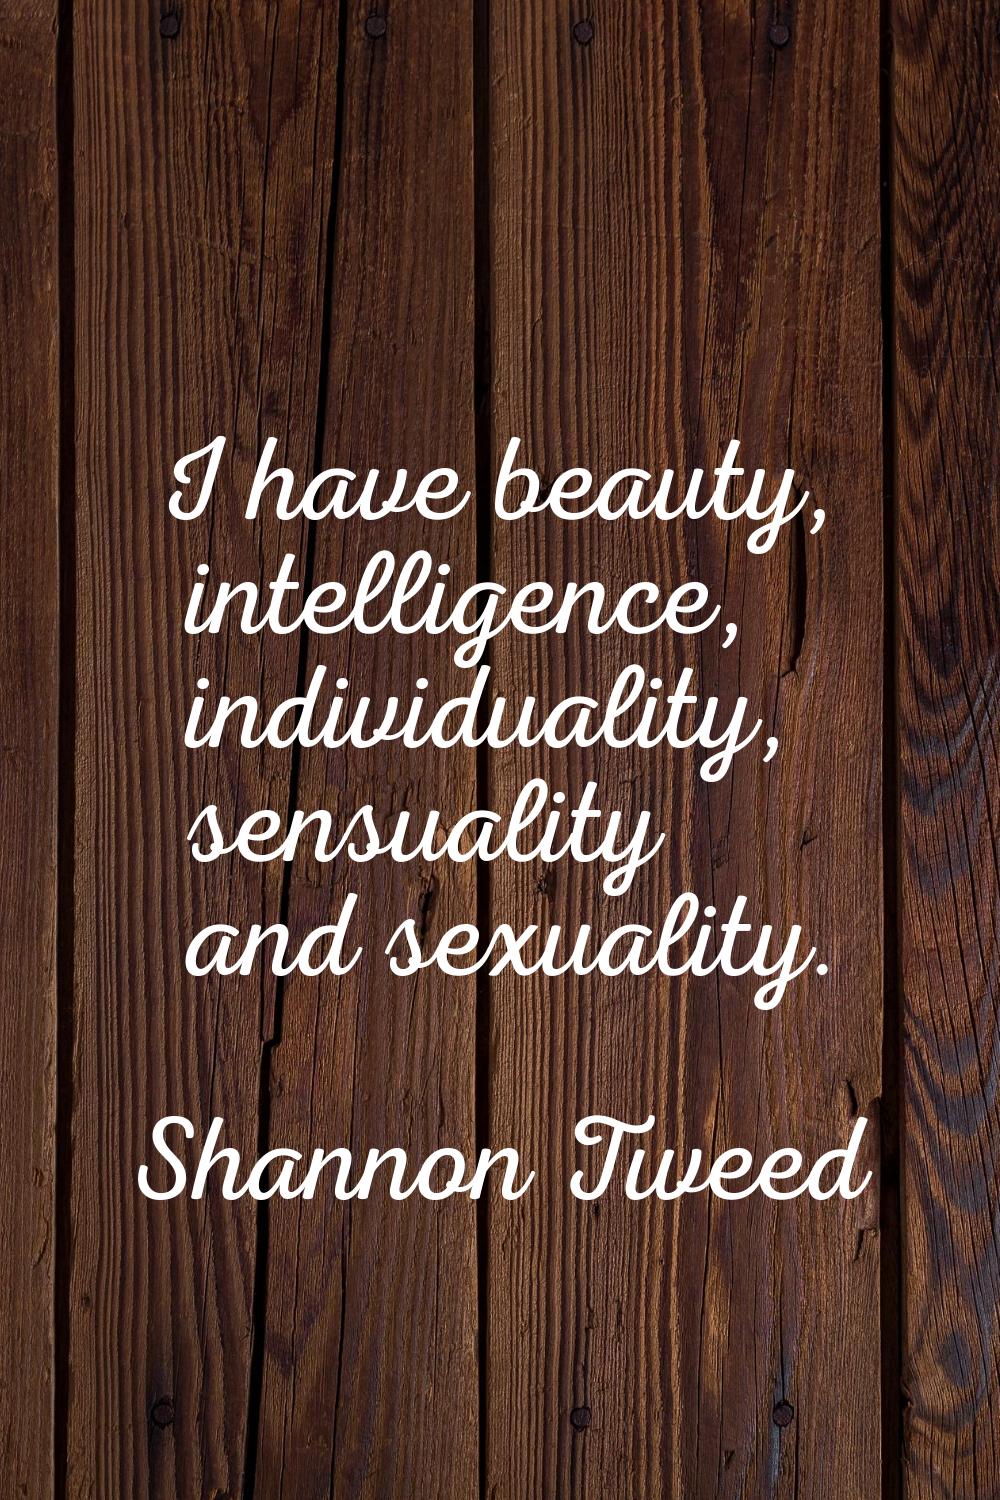 I have beauty, intelligence, individuality, sensuality and sexuality.